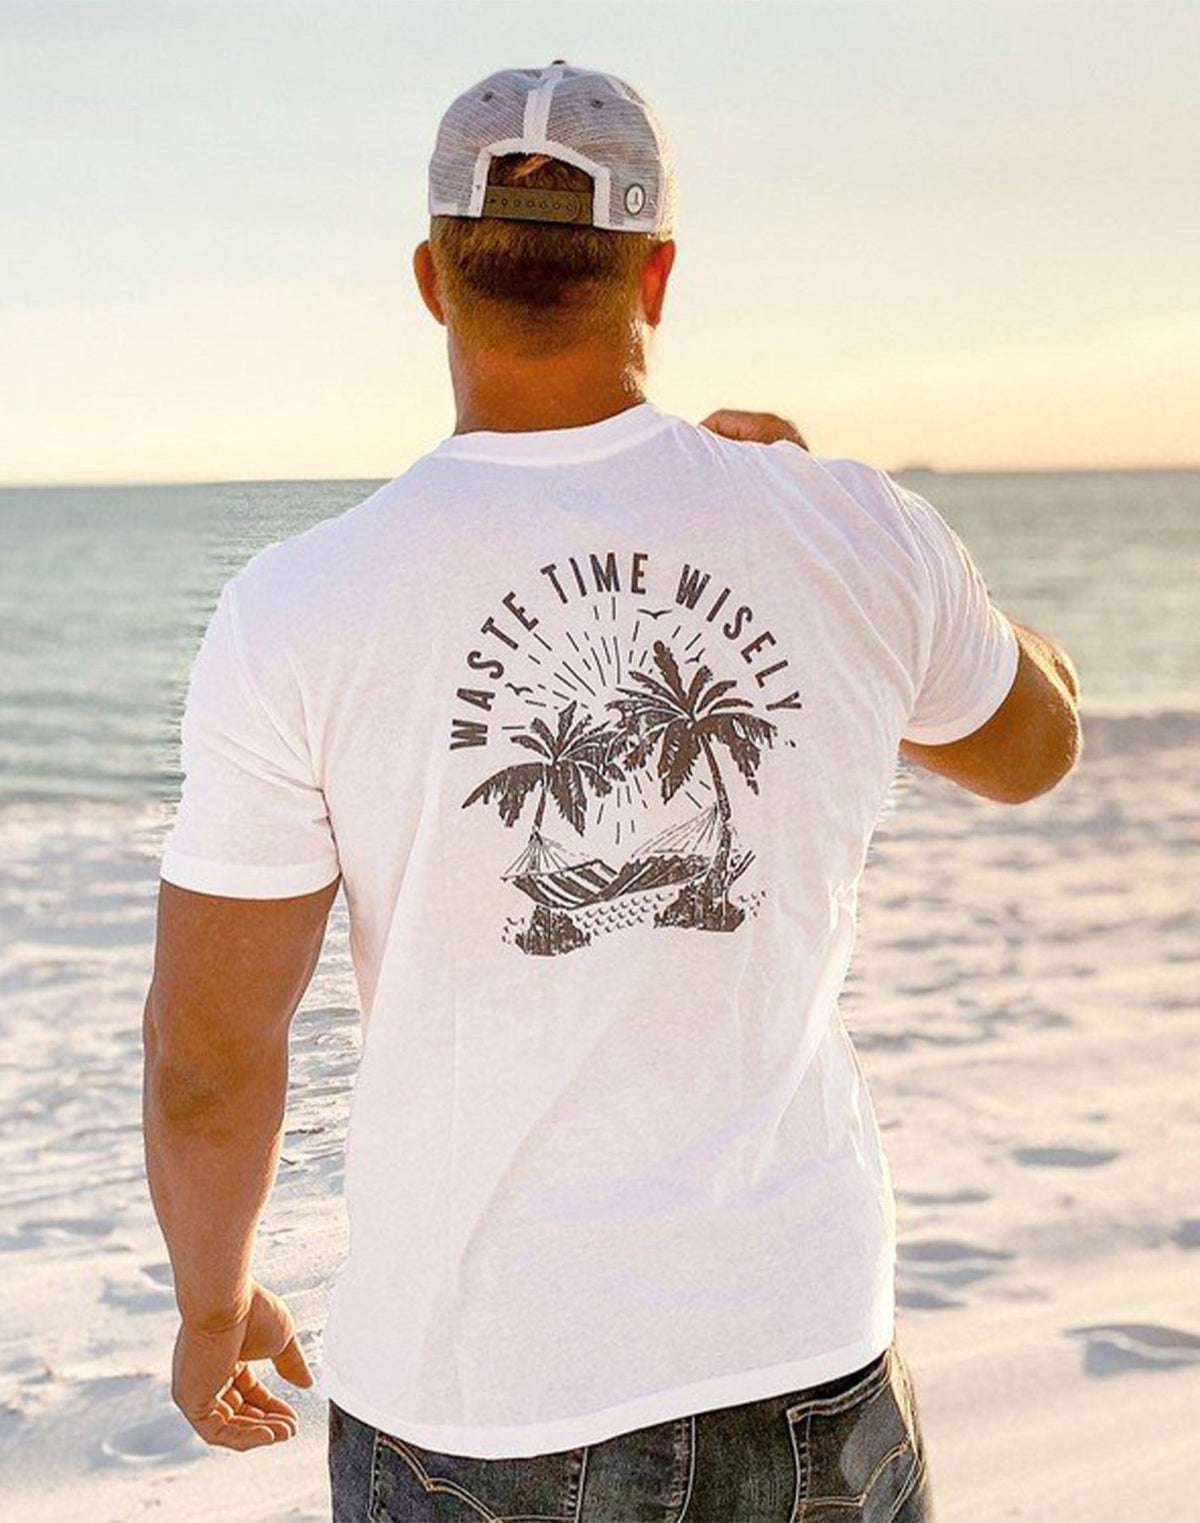 Waste Time Wisely T - Shirt - 30A Gear - men tee